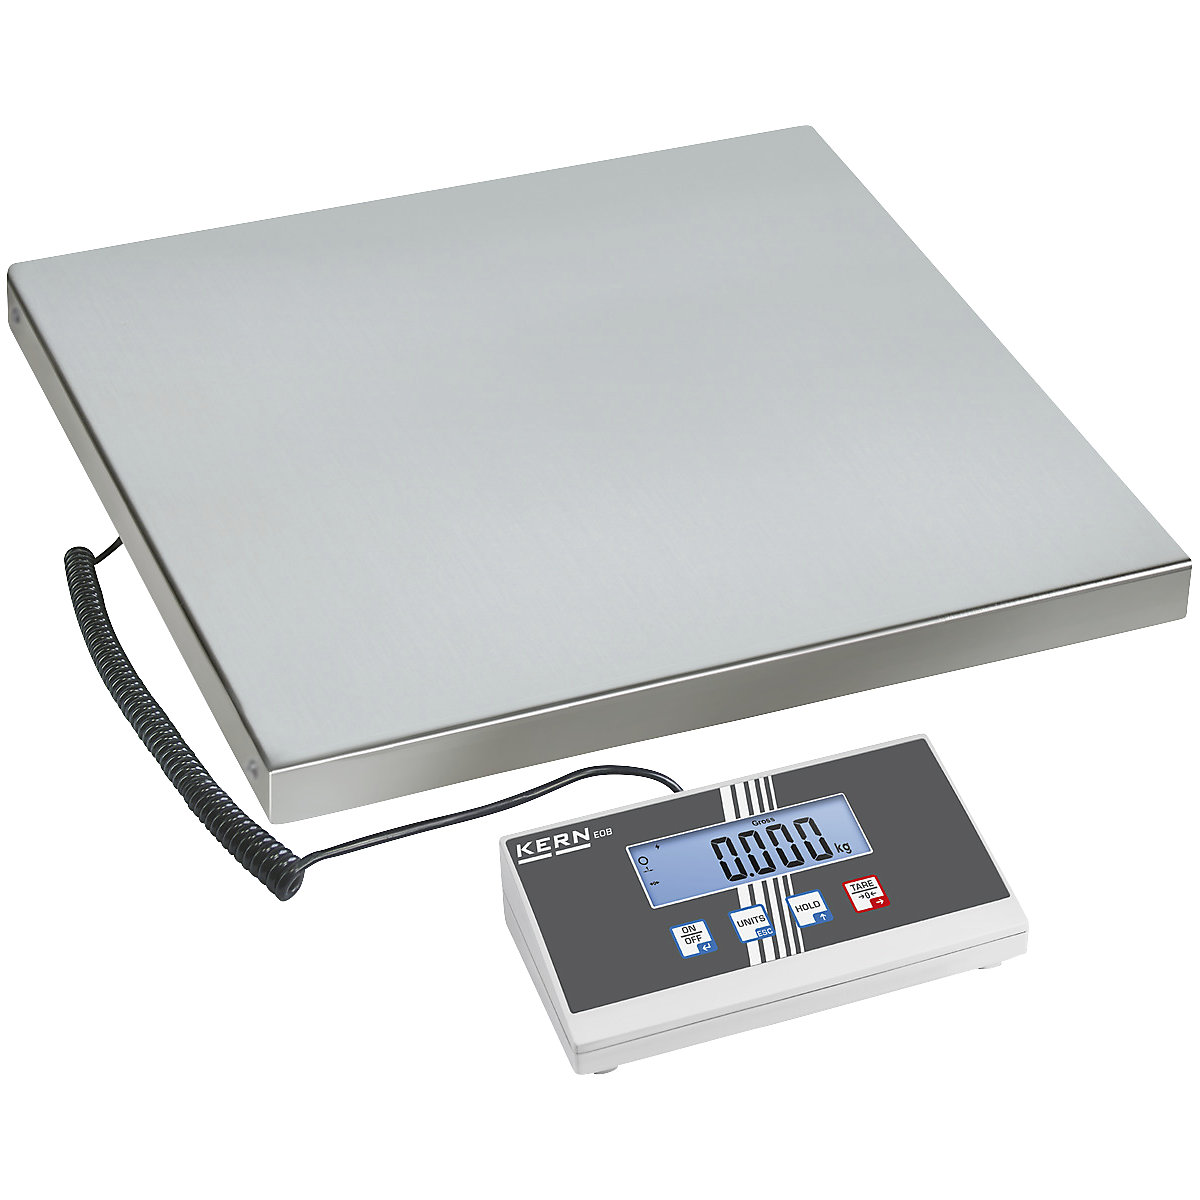 Parcel scales – KERN, robust weighing plate, weighing range up to 60 kg, read-out accuracy 20 g, weighing plate 550 x 550 mm-3